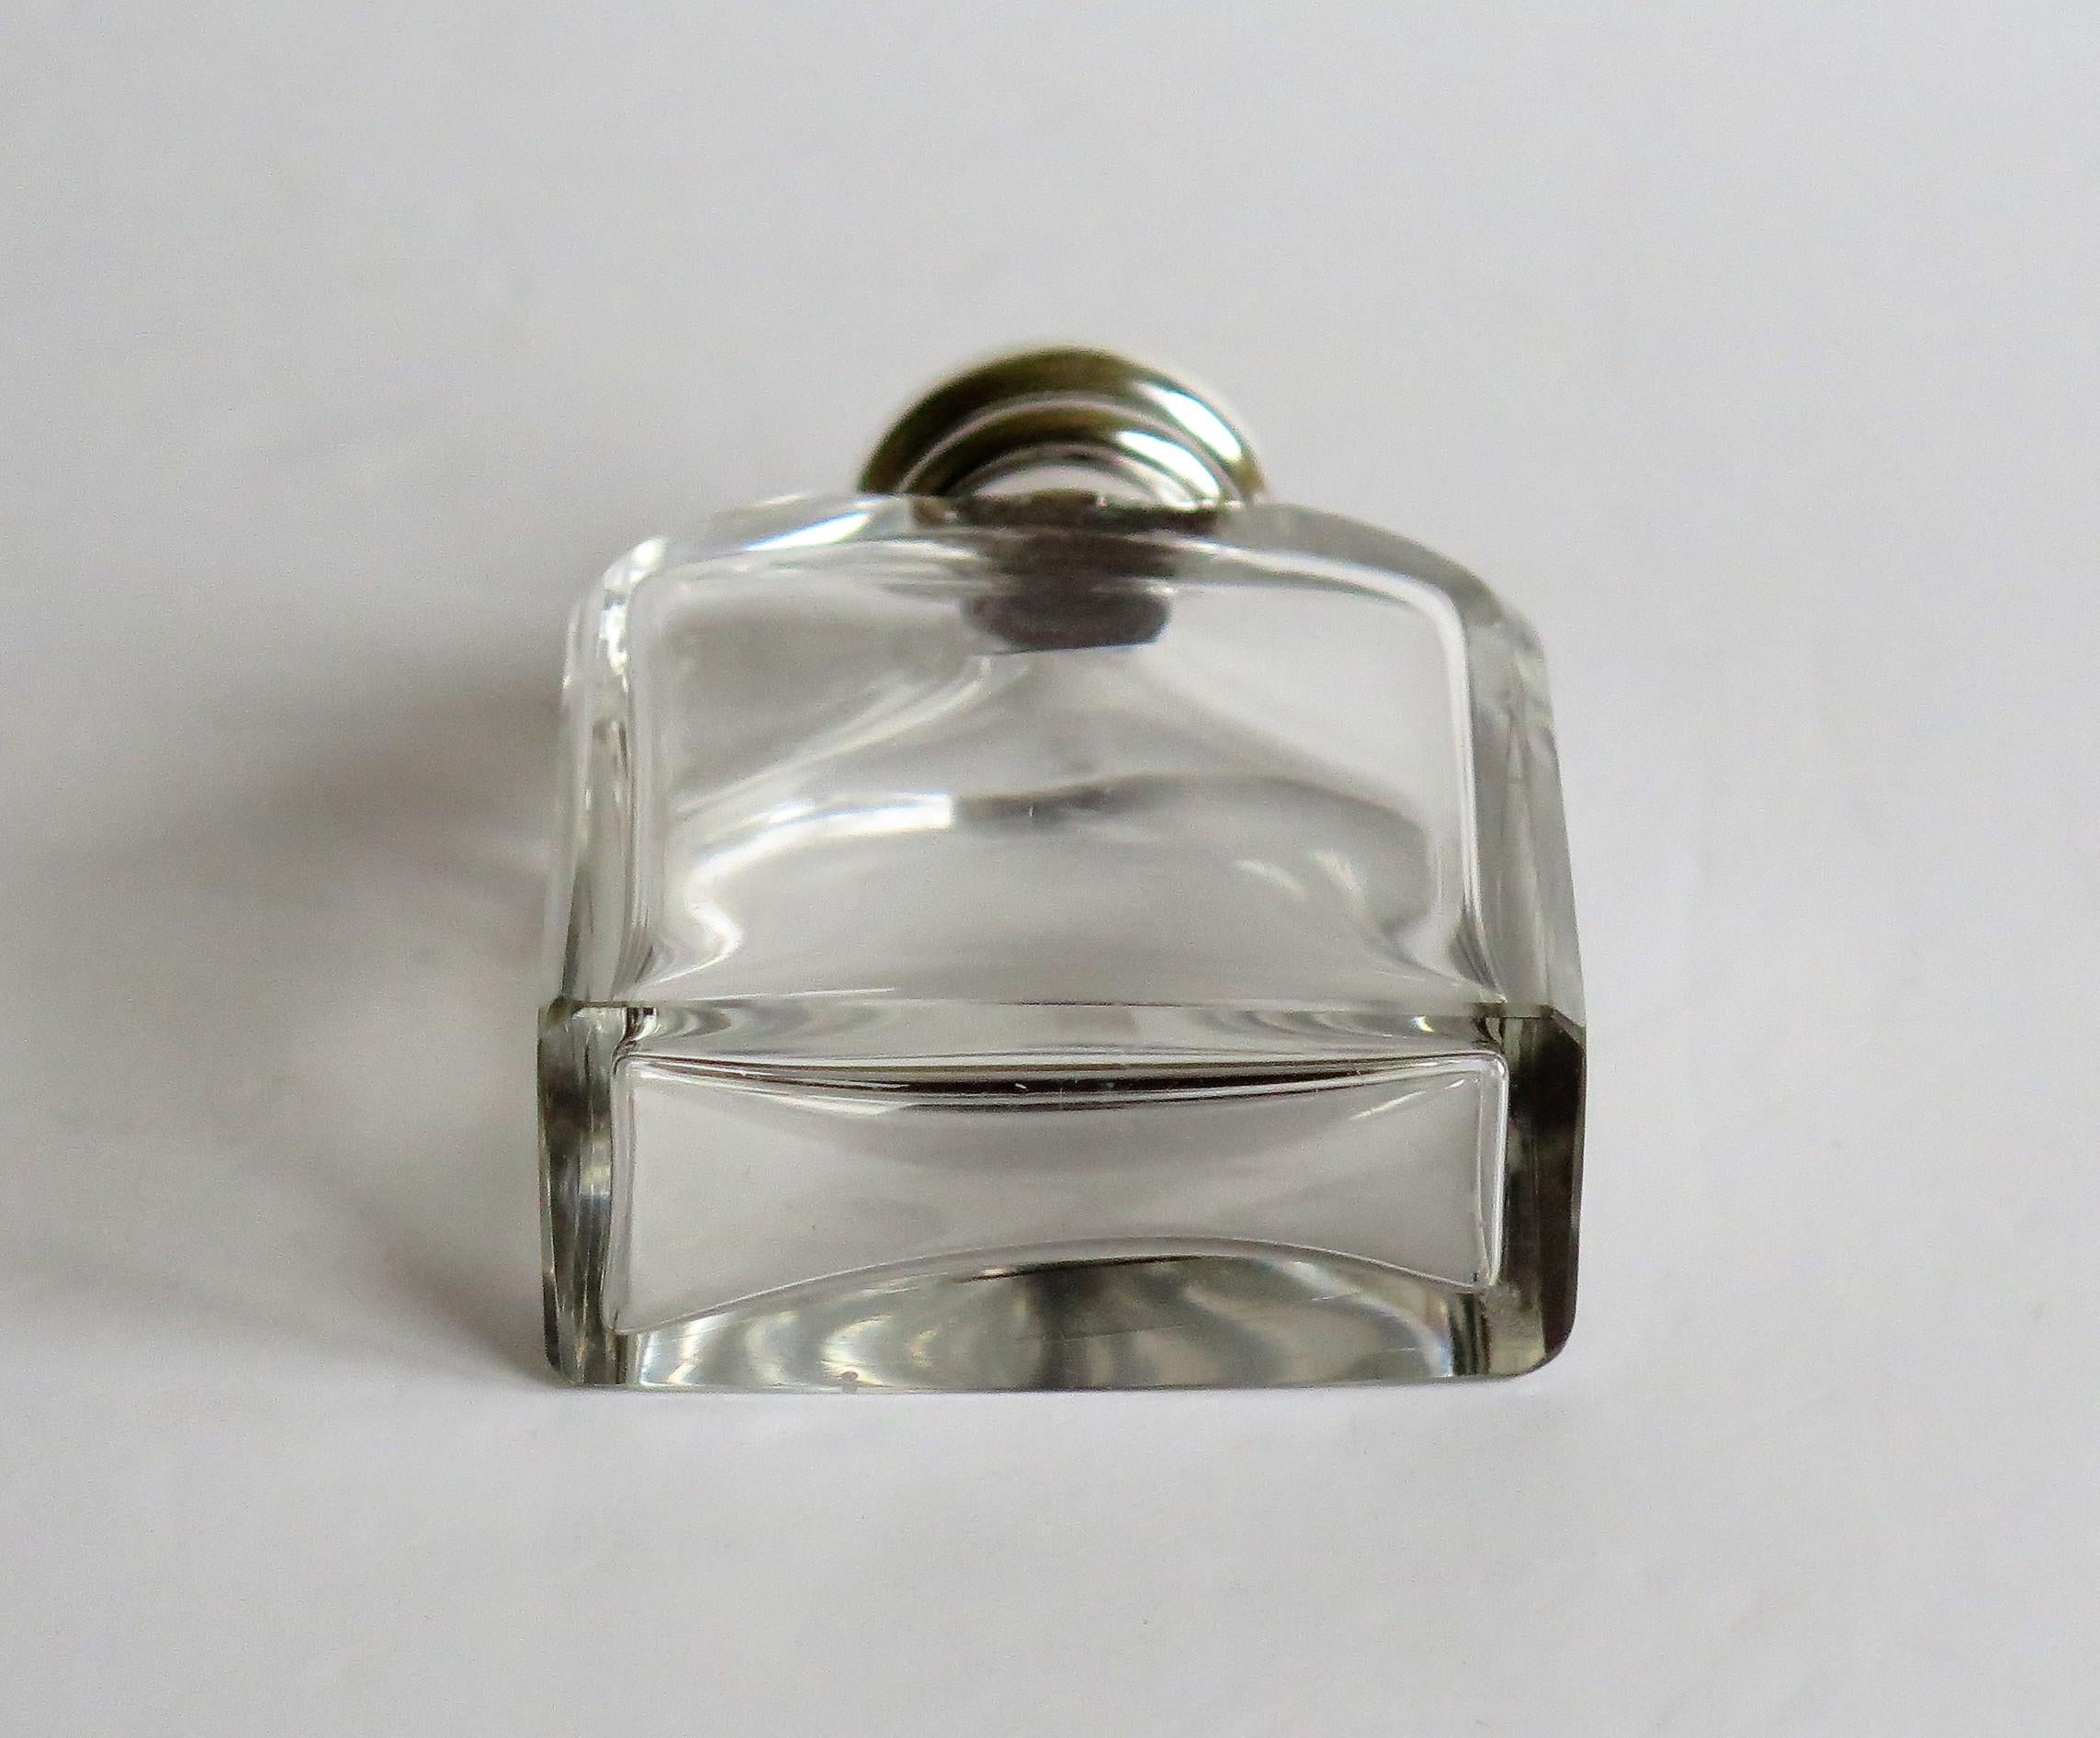 American Crystal Glass Cologne or Perfume Bottle with Sterling Silver Top, circa 1910